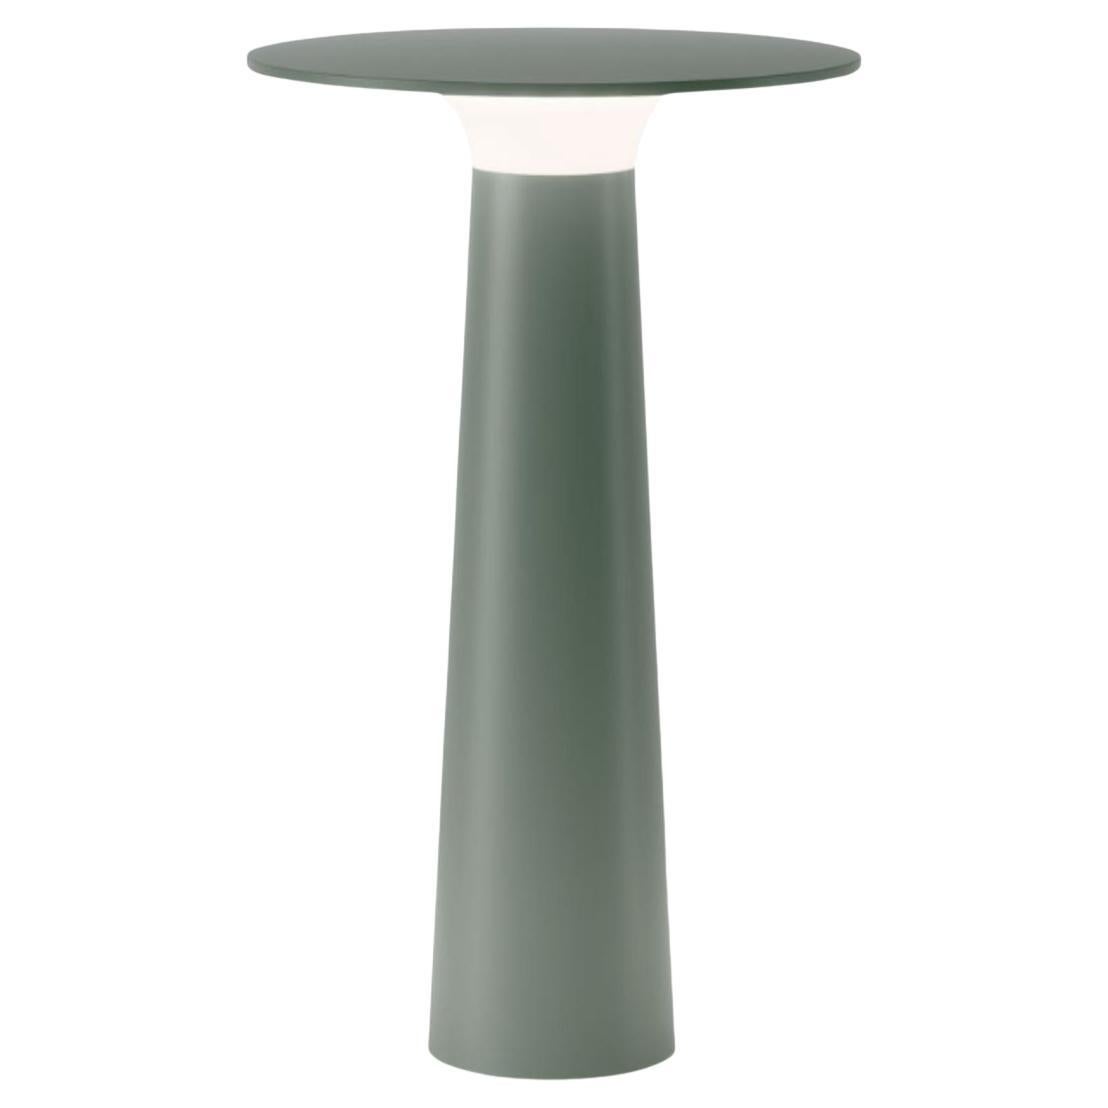 Klaus Nolting 'Lix' Portable Outdoor Aluminum Table Lamp in Yellow for IP44de For Sale 7